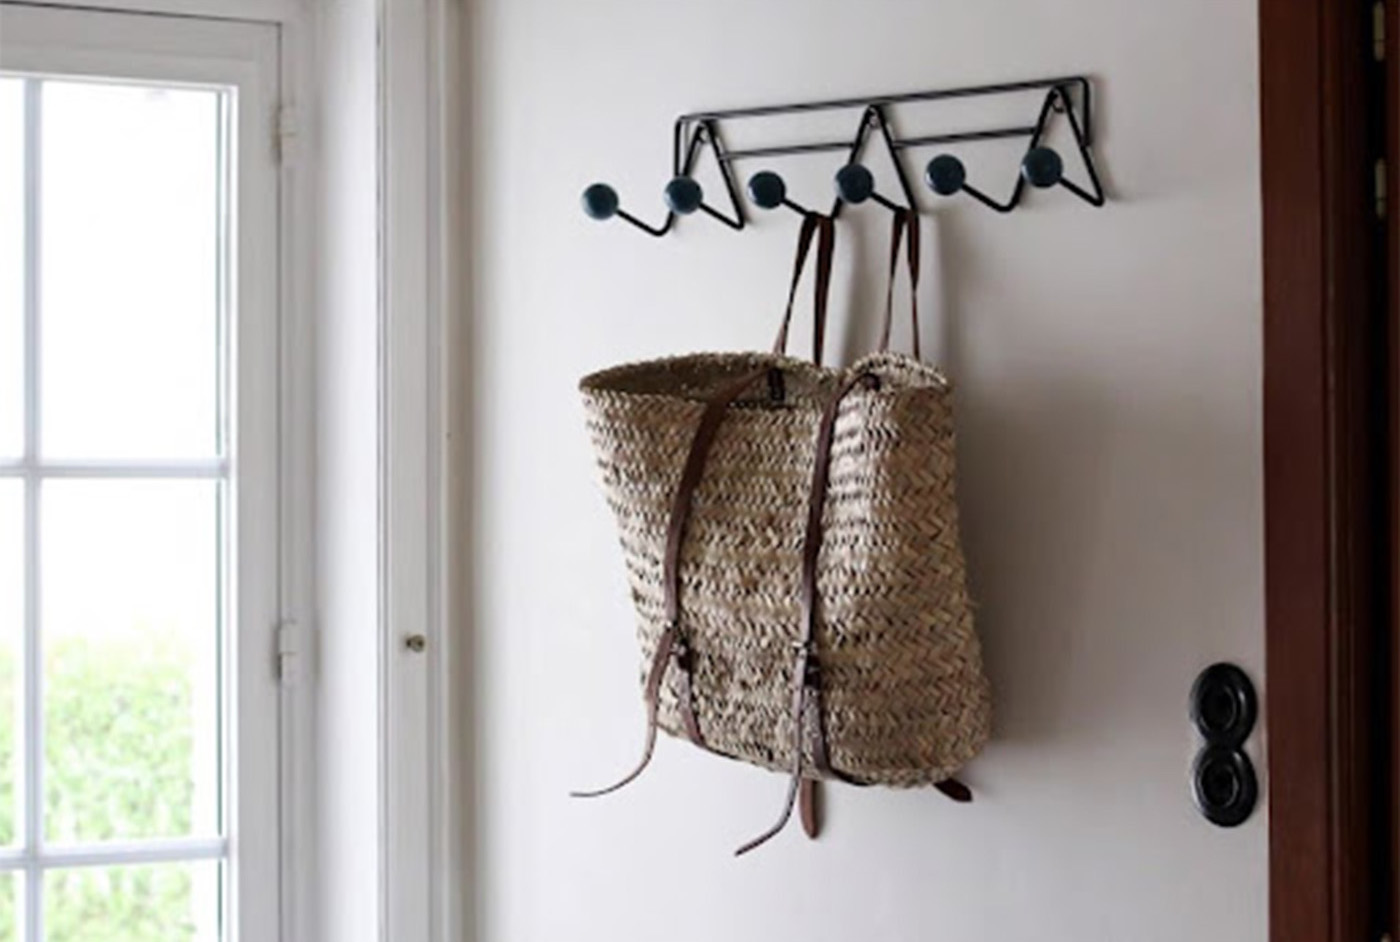 A woven bag hangs on a coat hanger on the wall next to a glass door.